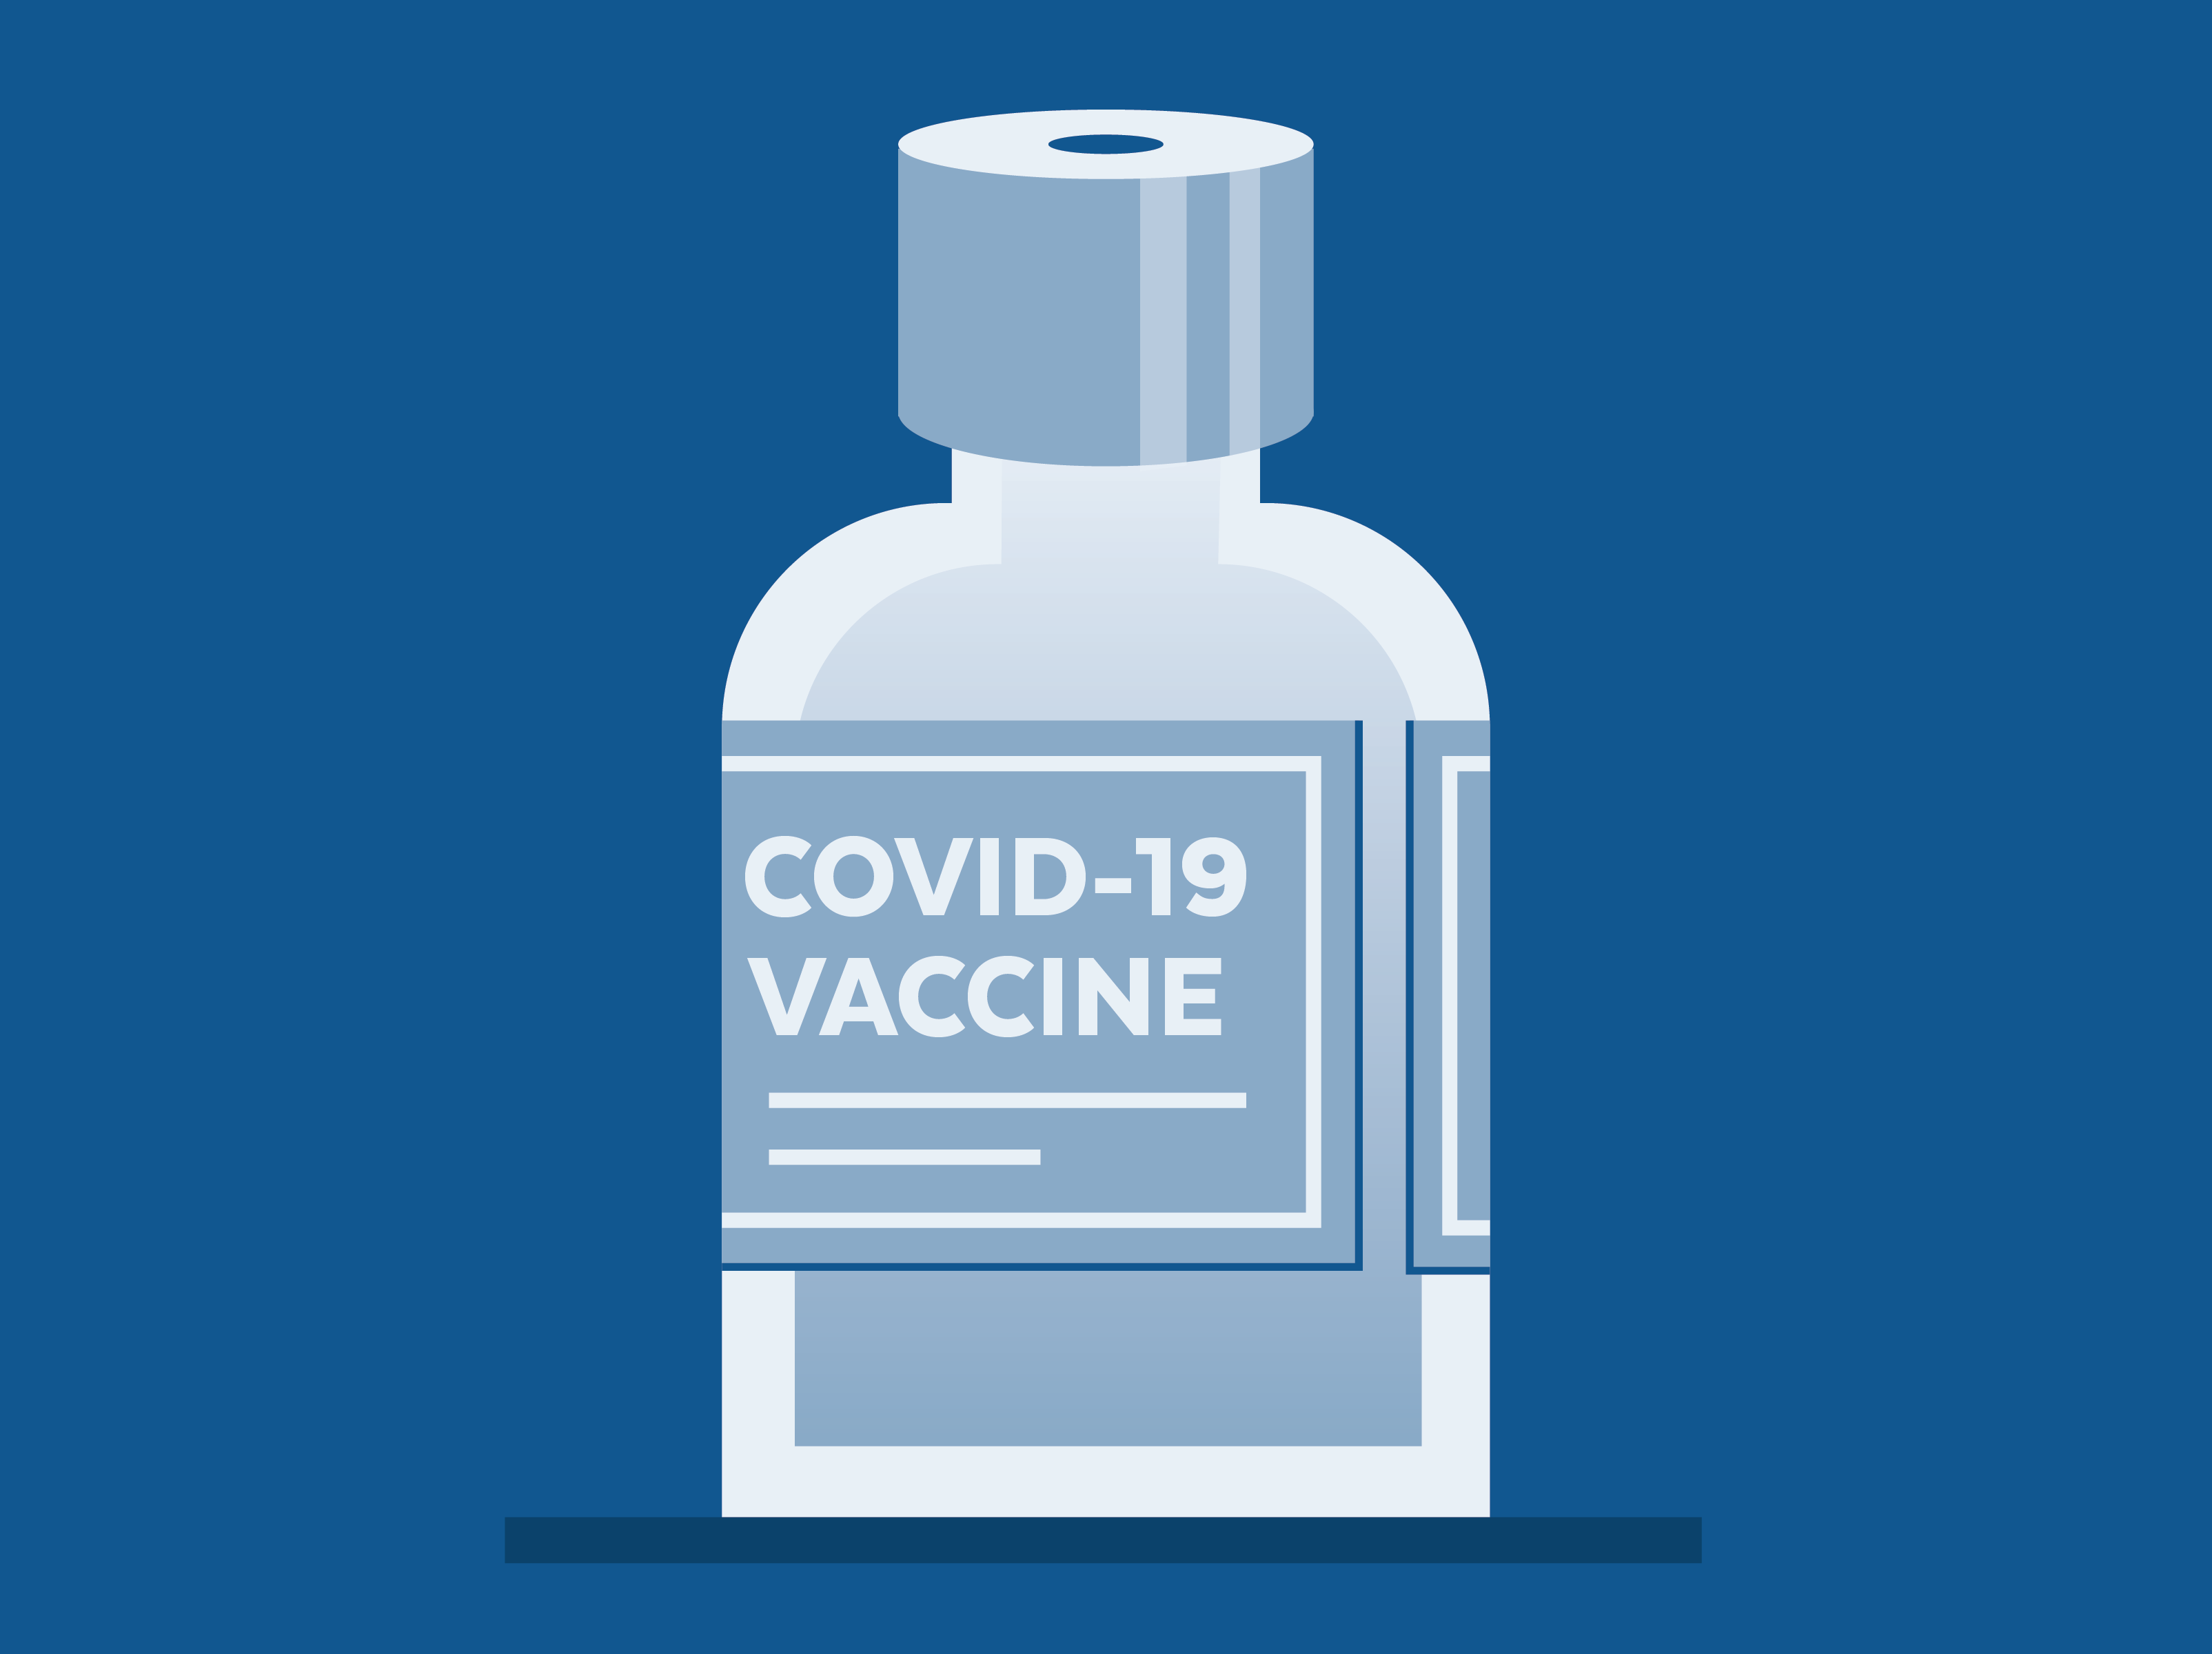 Where To Take Covid-19 Vaccine In Bac Giang? Address For Coronavirus Vaccinations In Vietnam